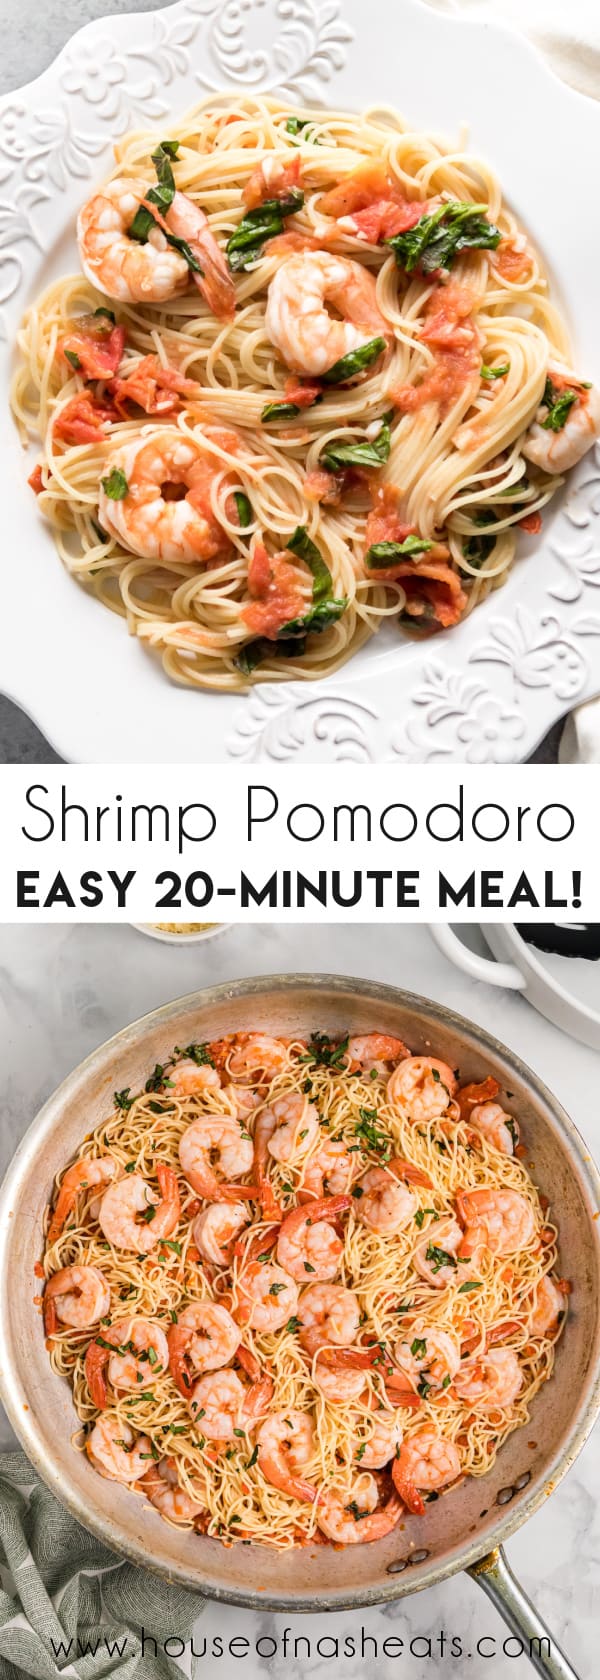 A collage of images of shrimp pomodoro with text overlay.